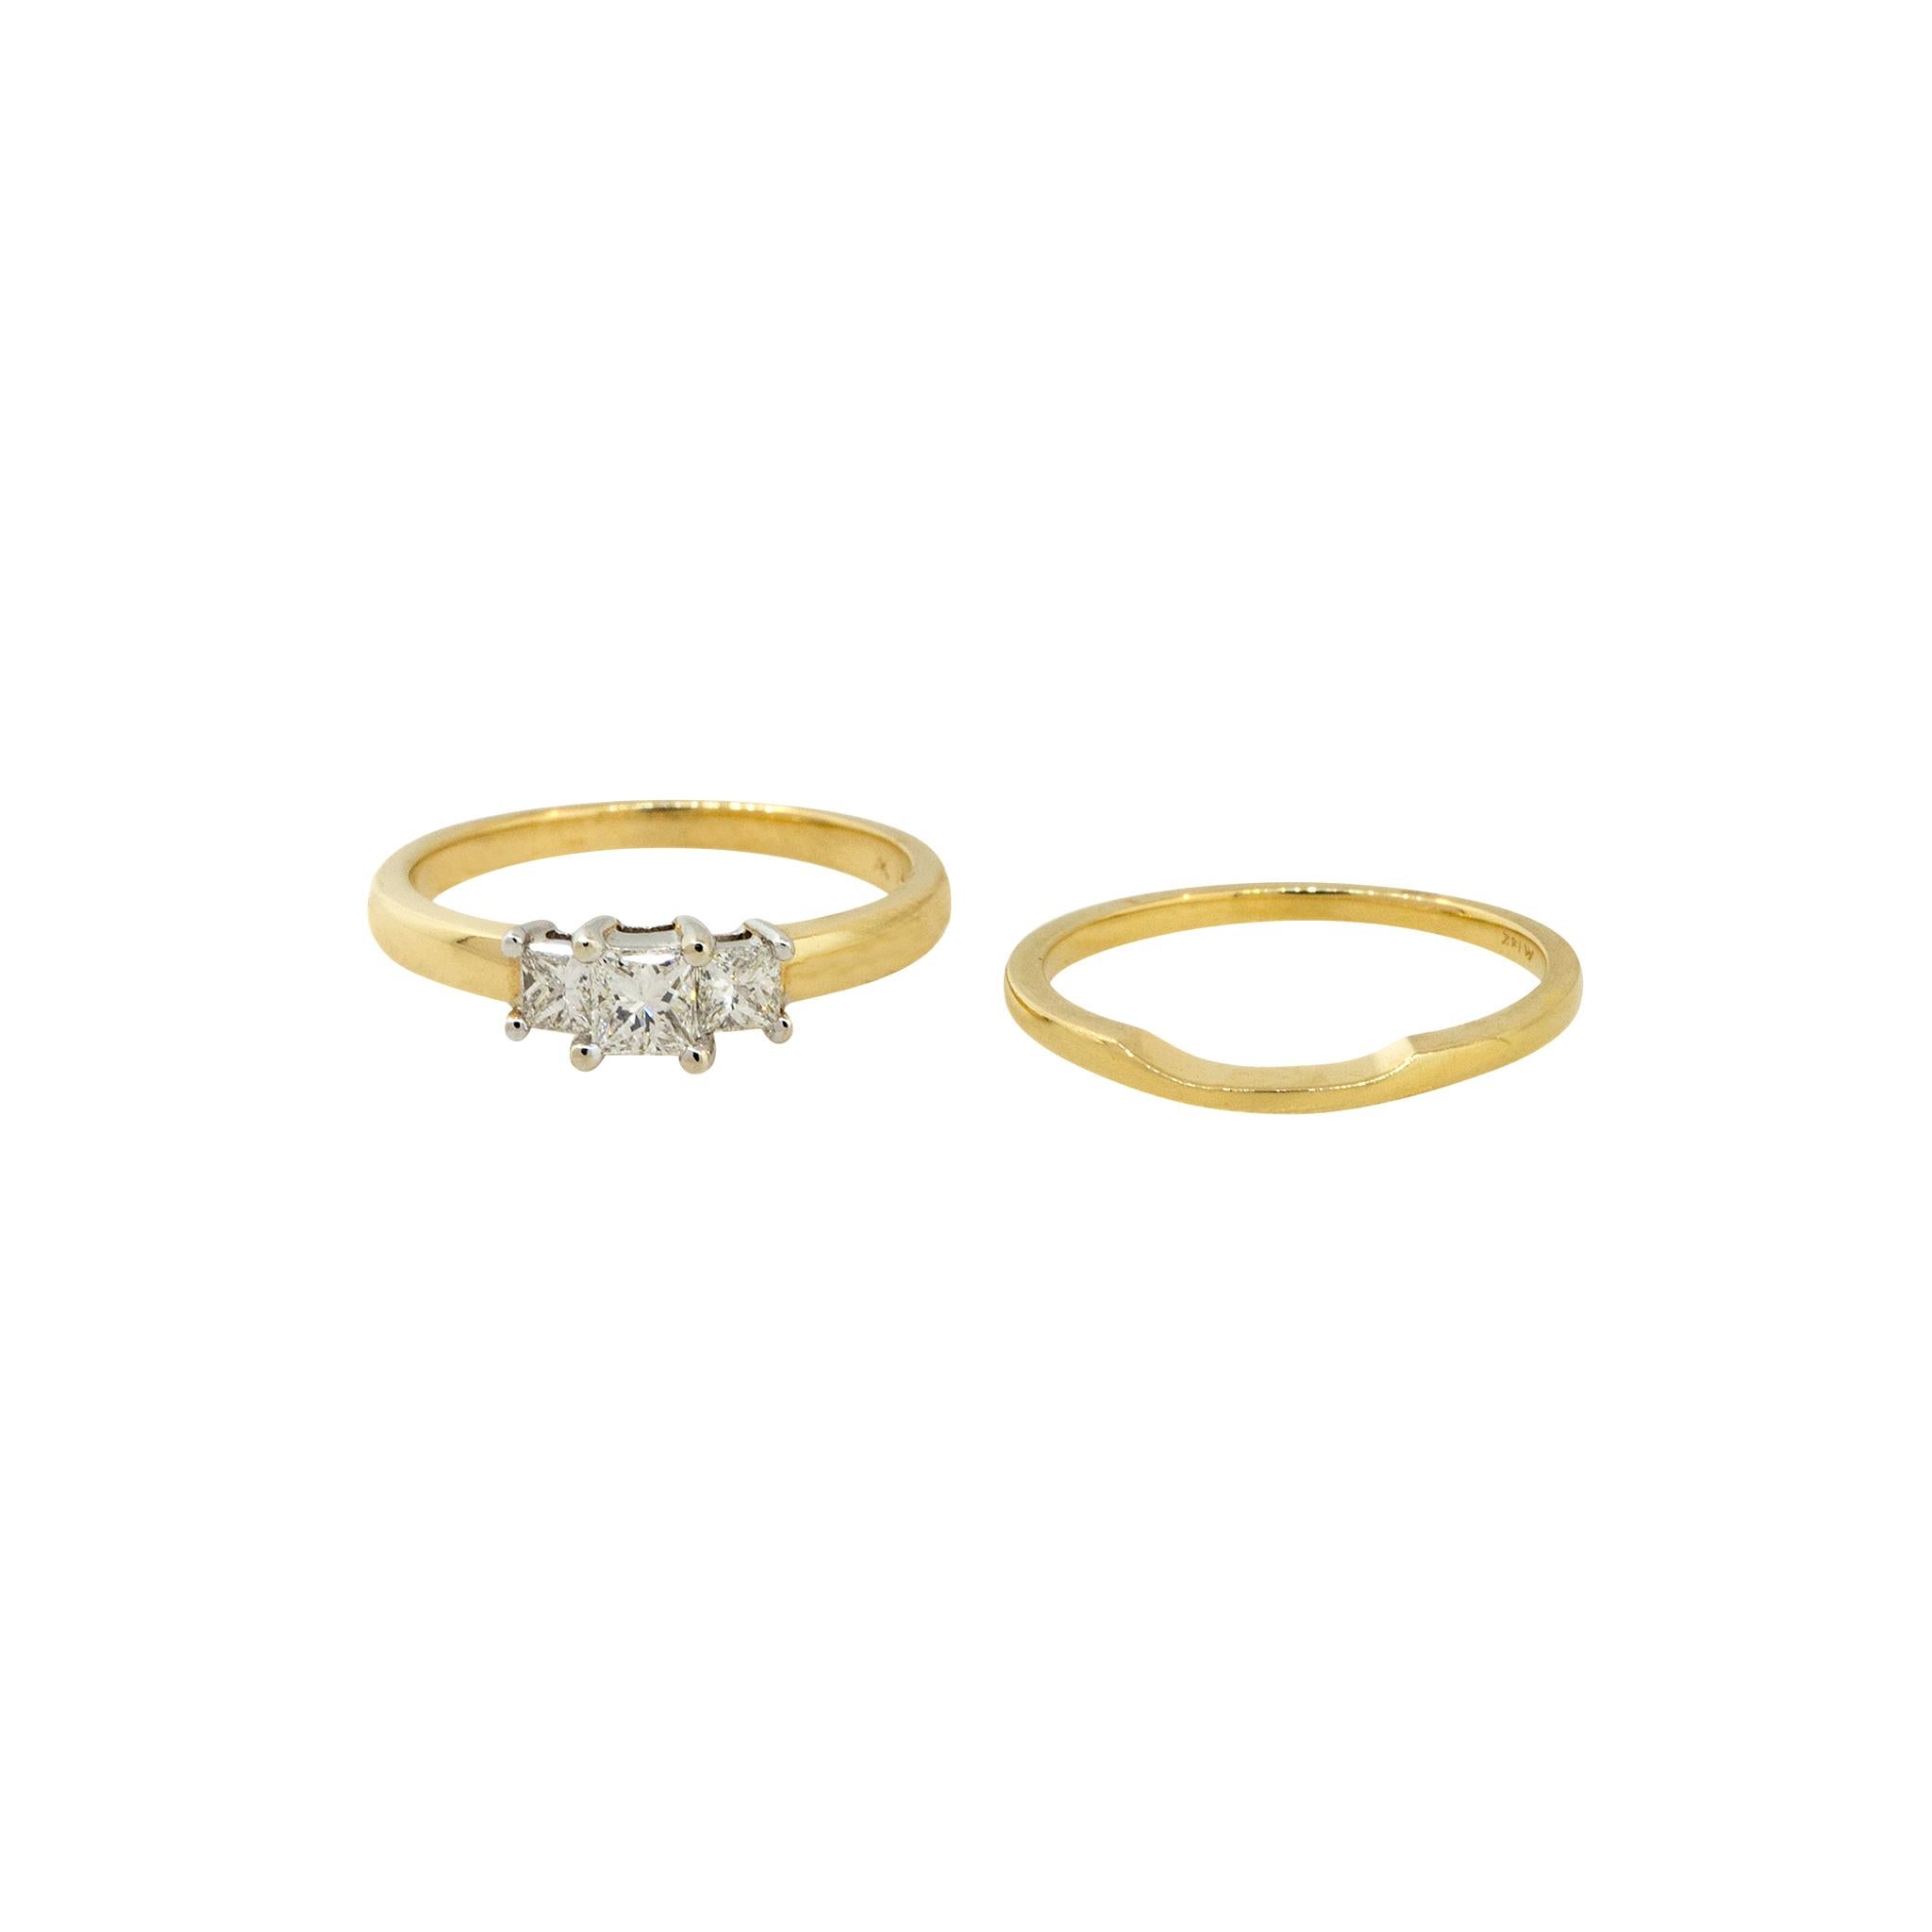 14k Yellow Gold 0.60ctw 3 Diamond Engagement Ring and Wedding Band Set

Check out this Engagement and Wedding Band Set! Raymond Lee Jewelers in Boca Raton -- South Florida’s destination for diamonds, fine jewelry, antique jewelry, estate pieces, and